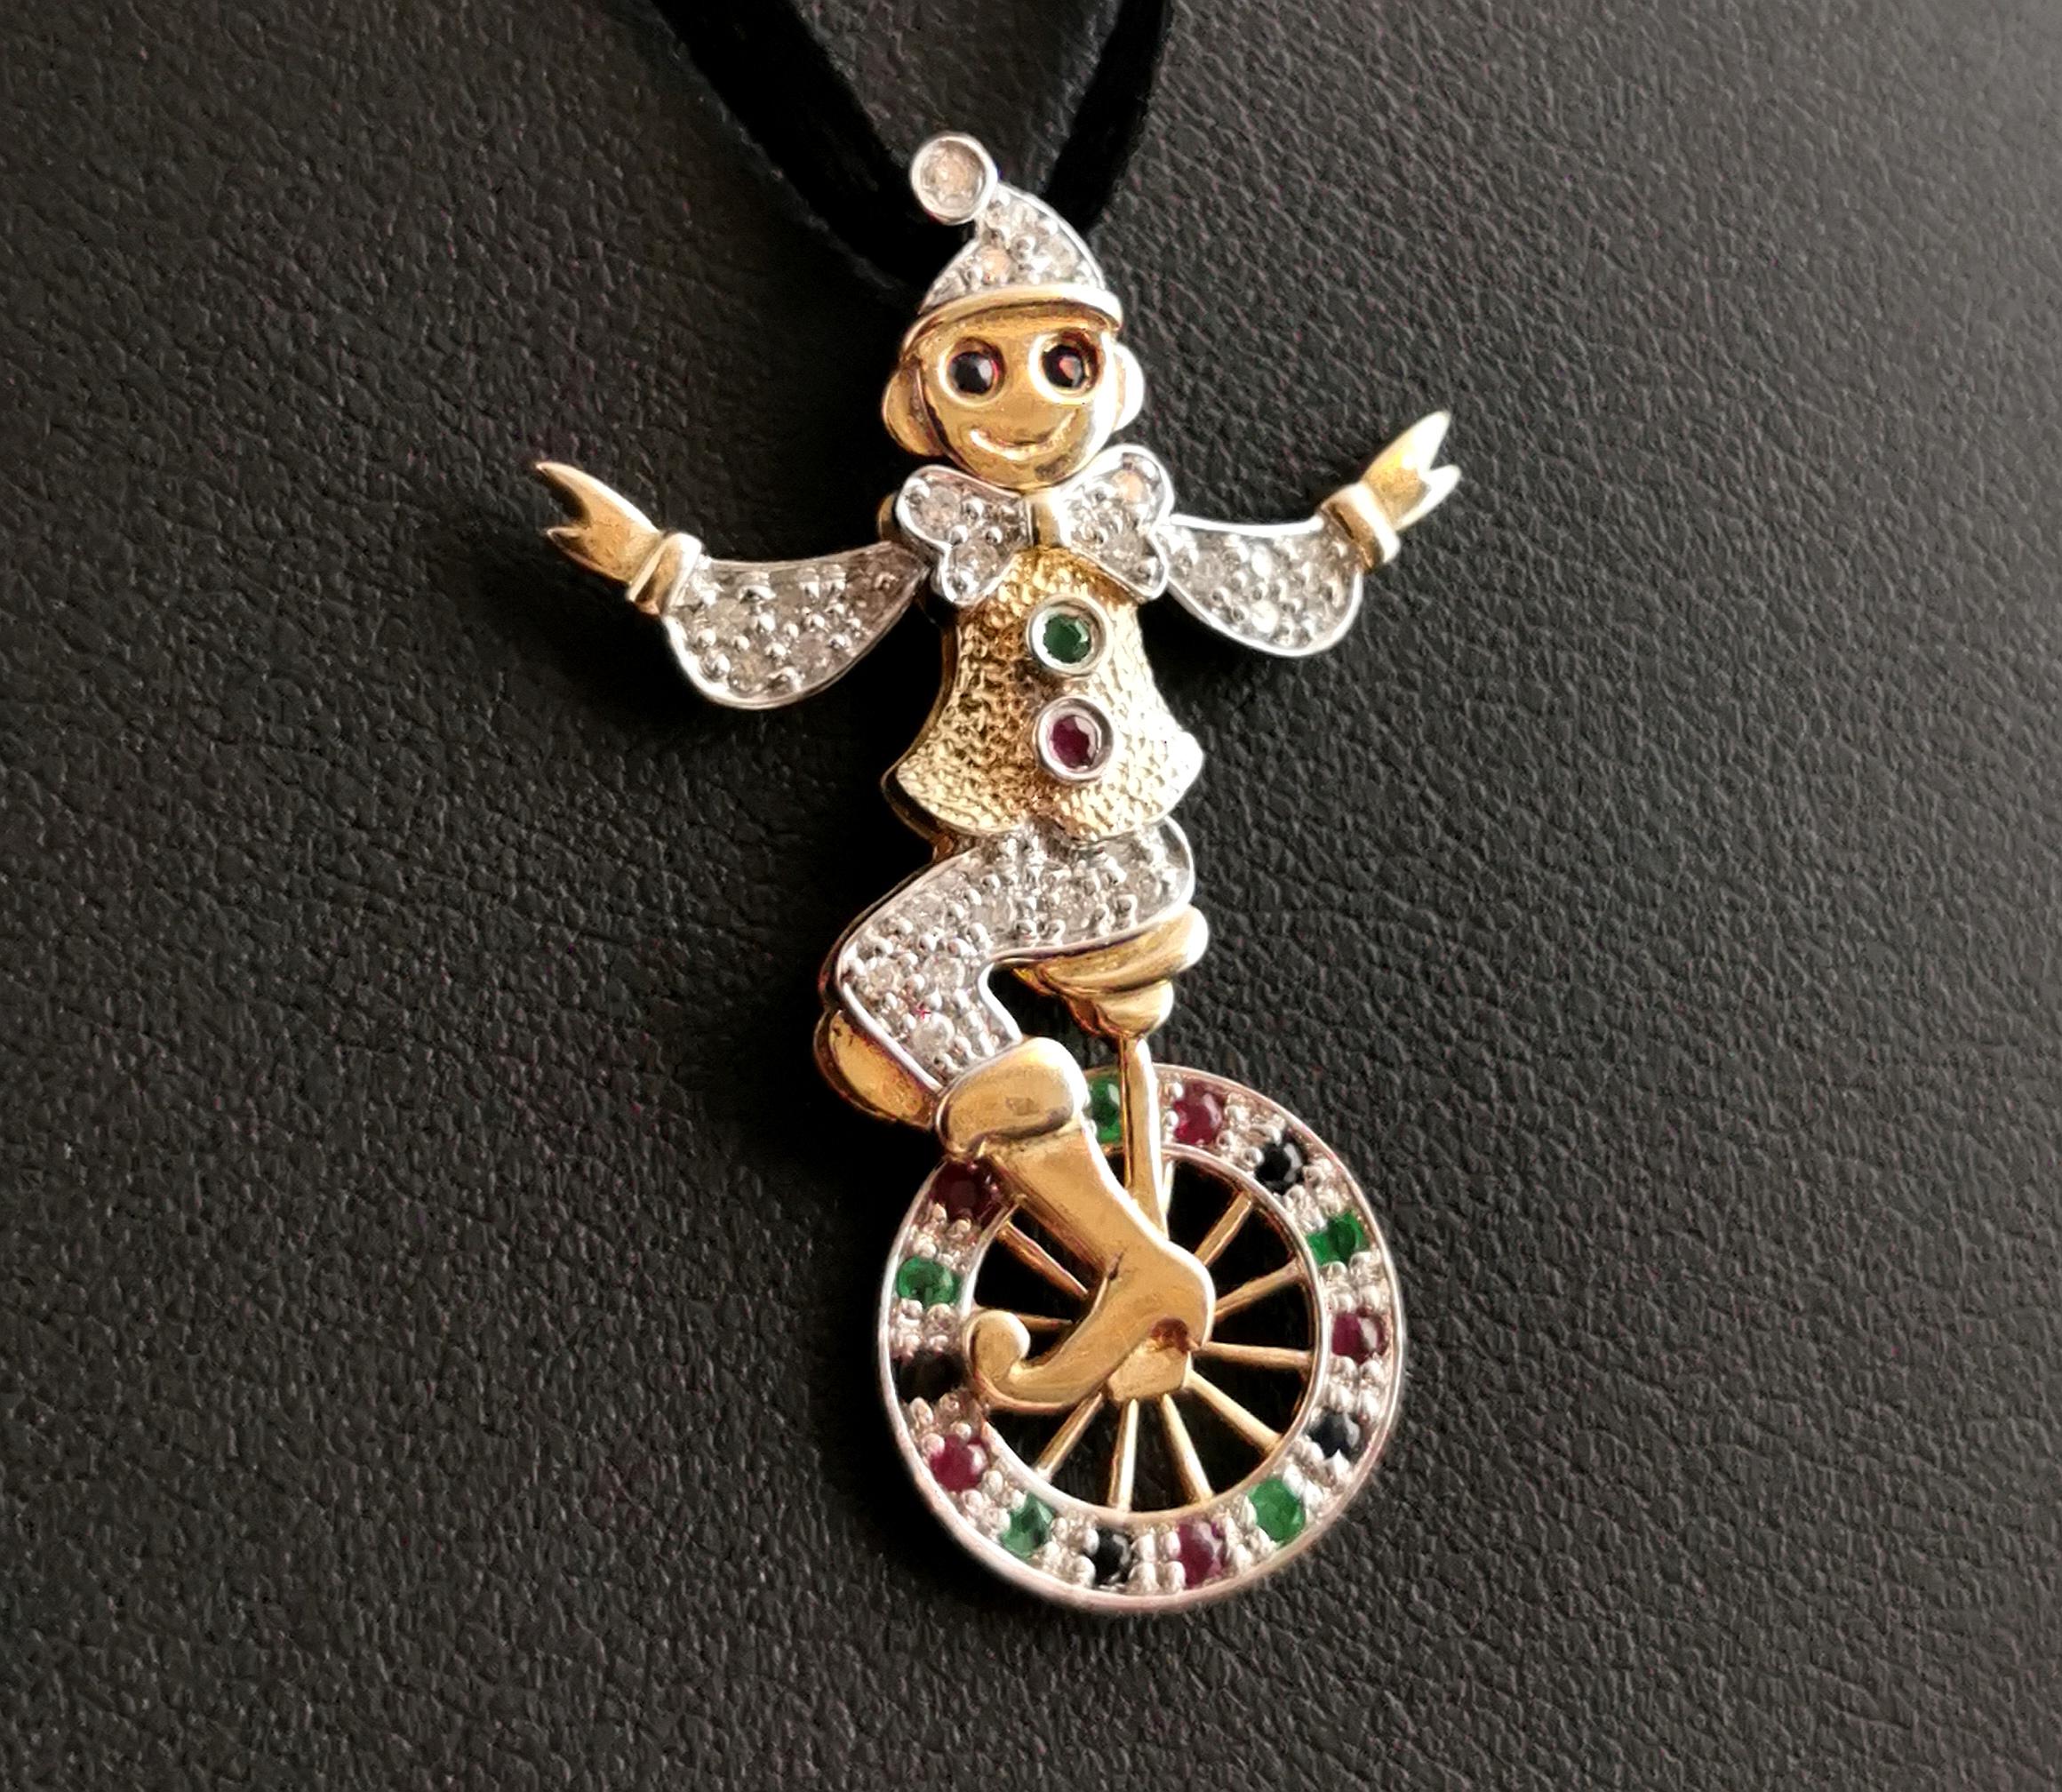 A fun, novelty vintage gemset clown pendant in 9kt gold.

This awesome pendant is loaded with sparkly gems and is a fun and happy piece of jewellery for sure!

It is designed as a clown riding a unicycle and is an articulated pendant with movable